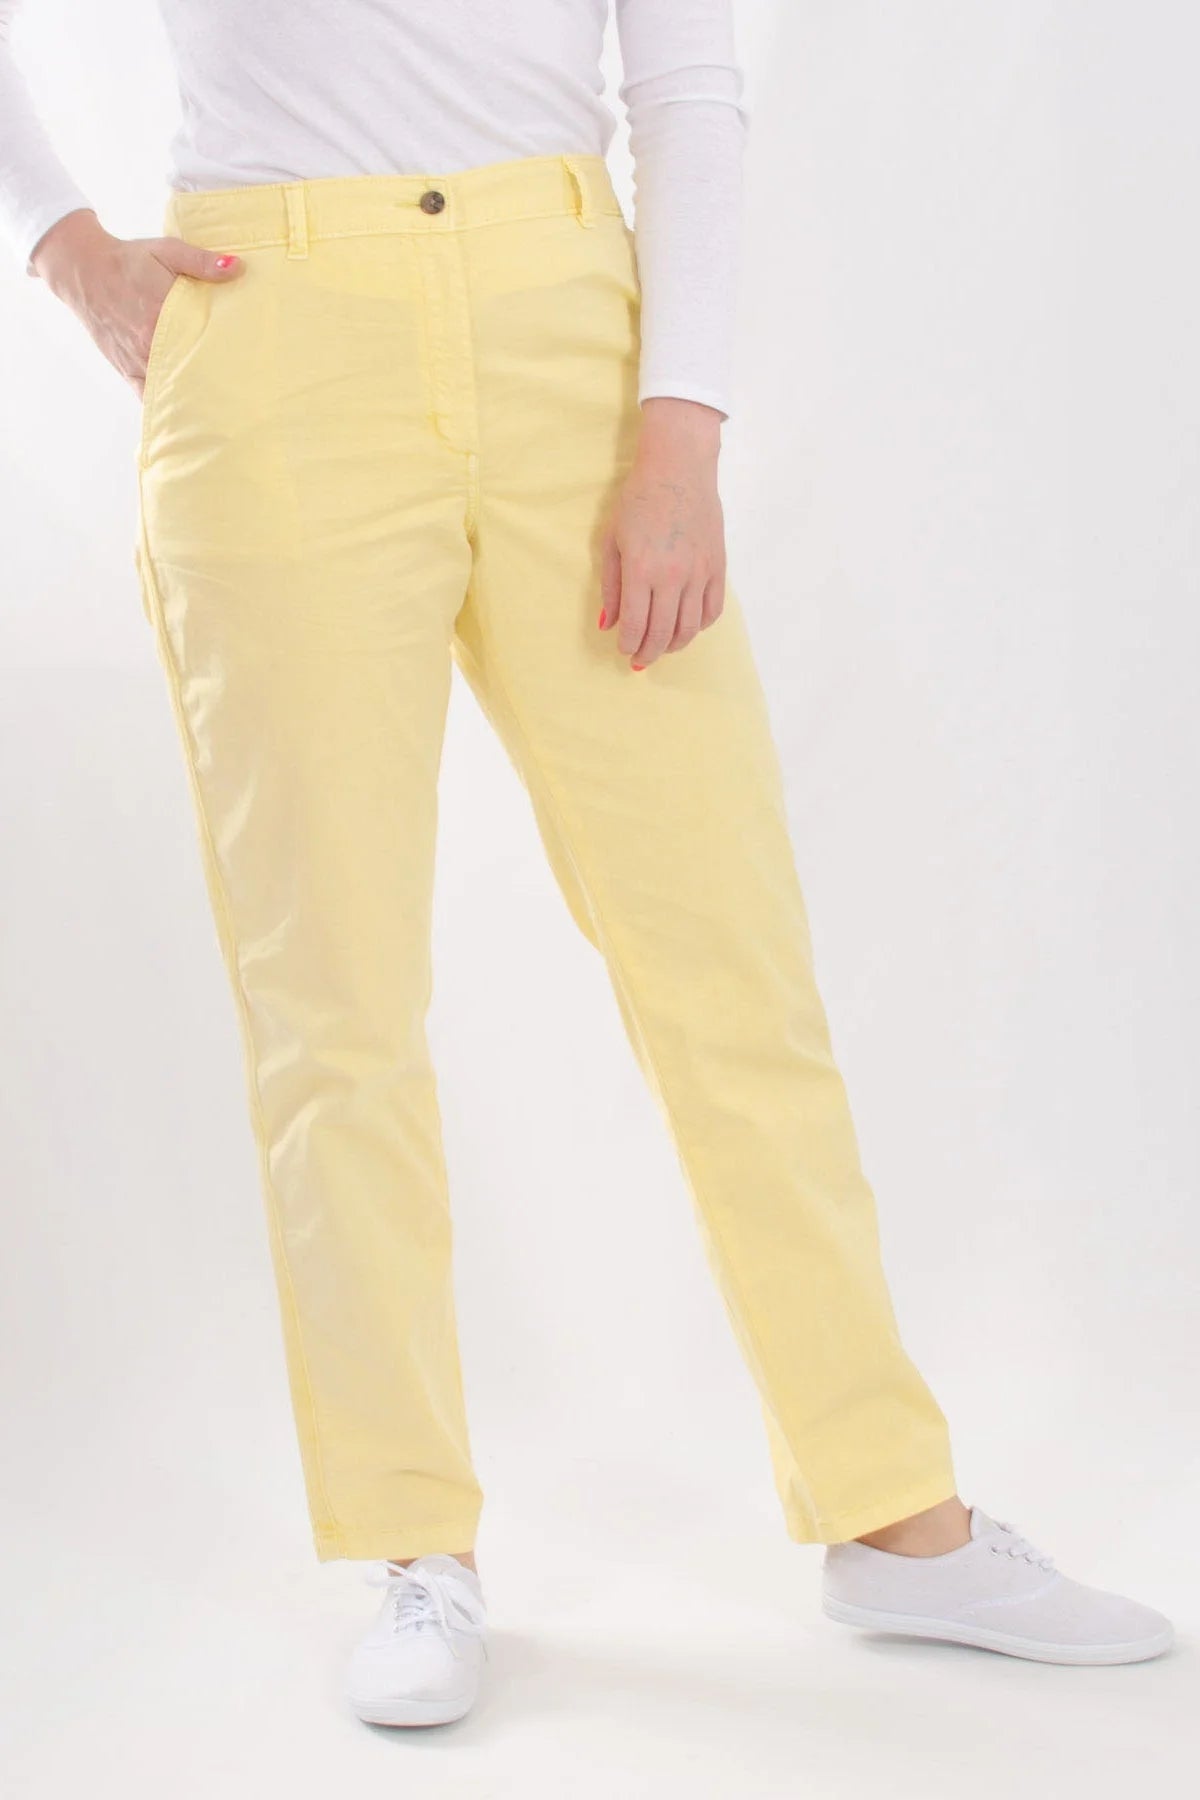 M&S Ankle Grazer Chino Trousers Yellow / 14 / Long